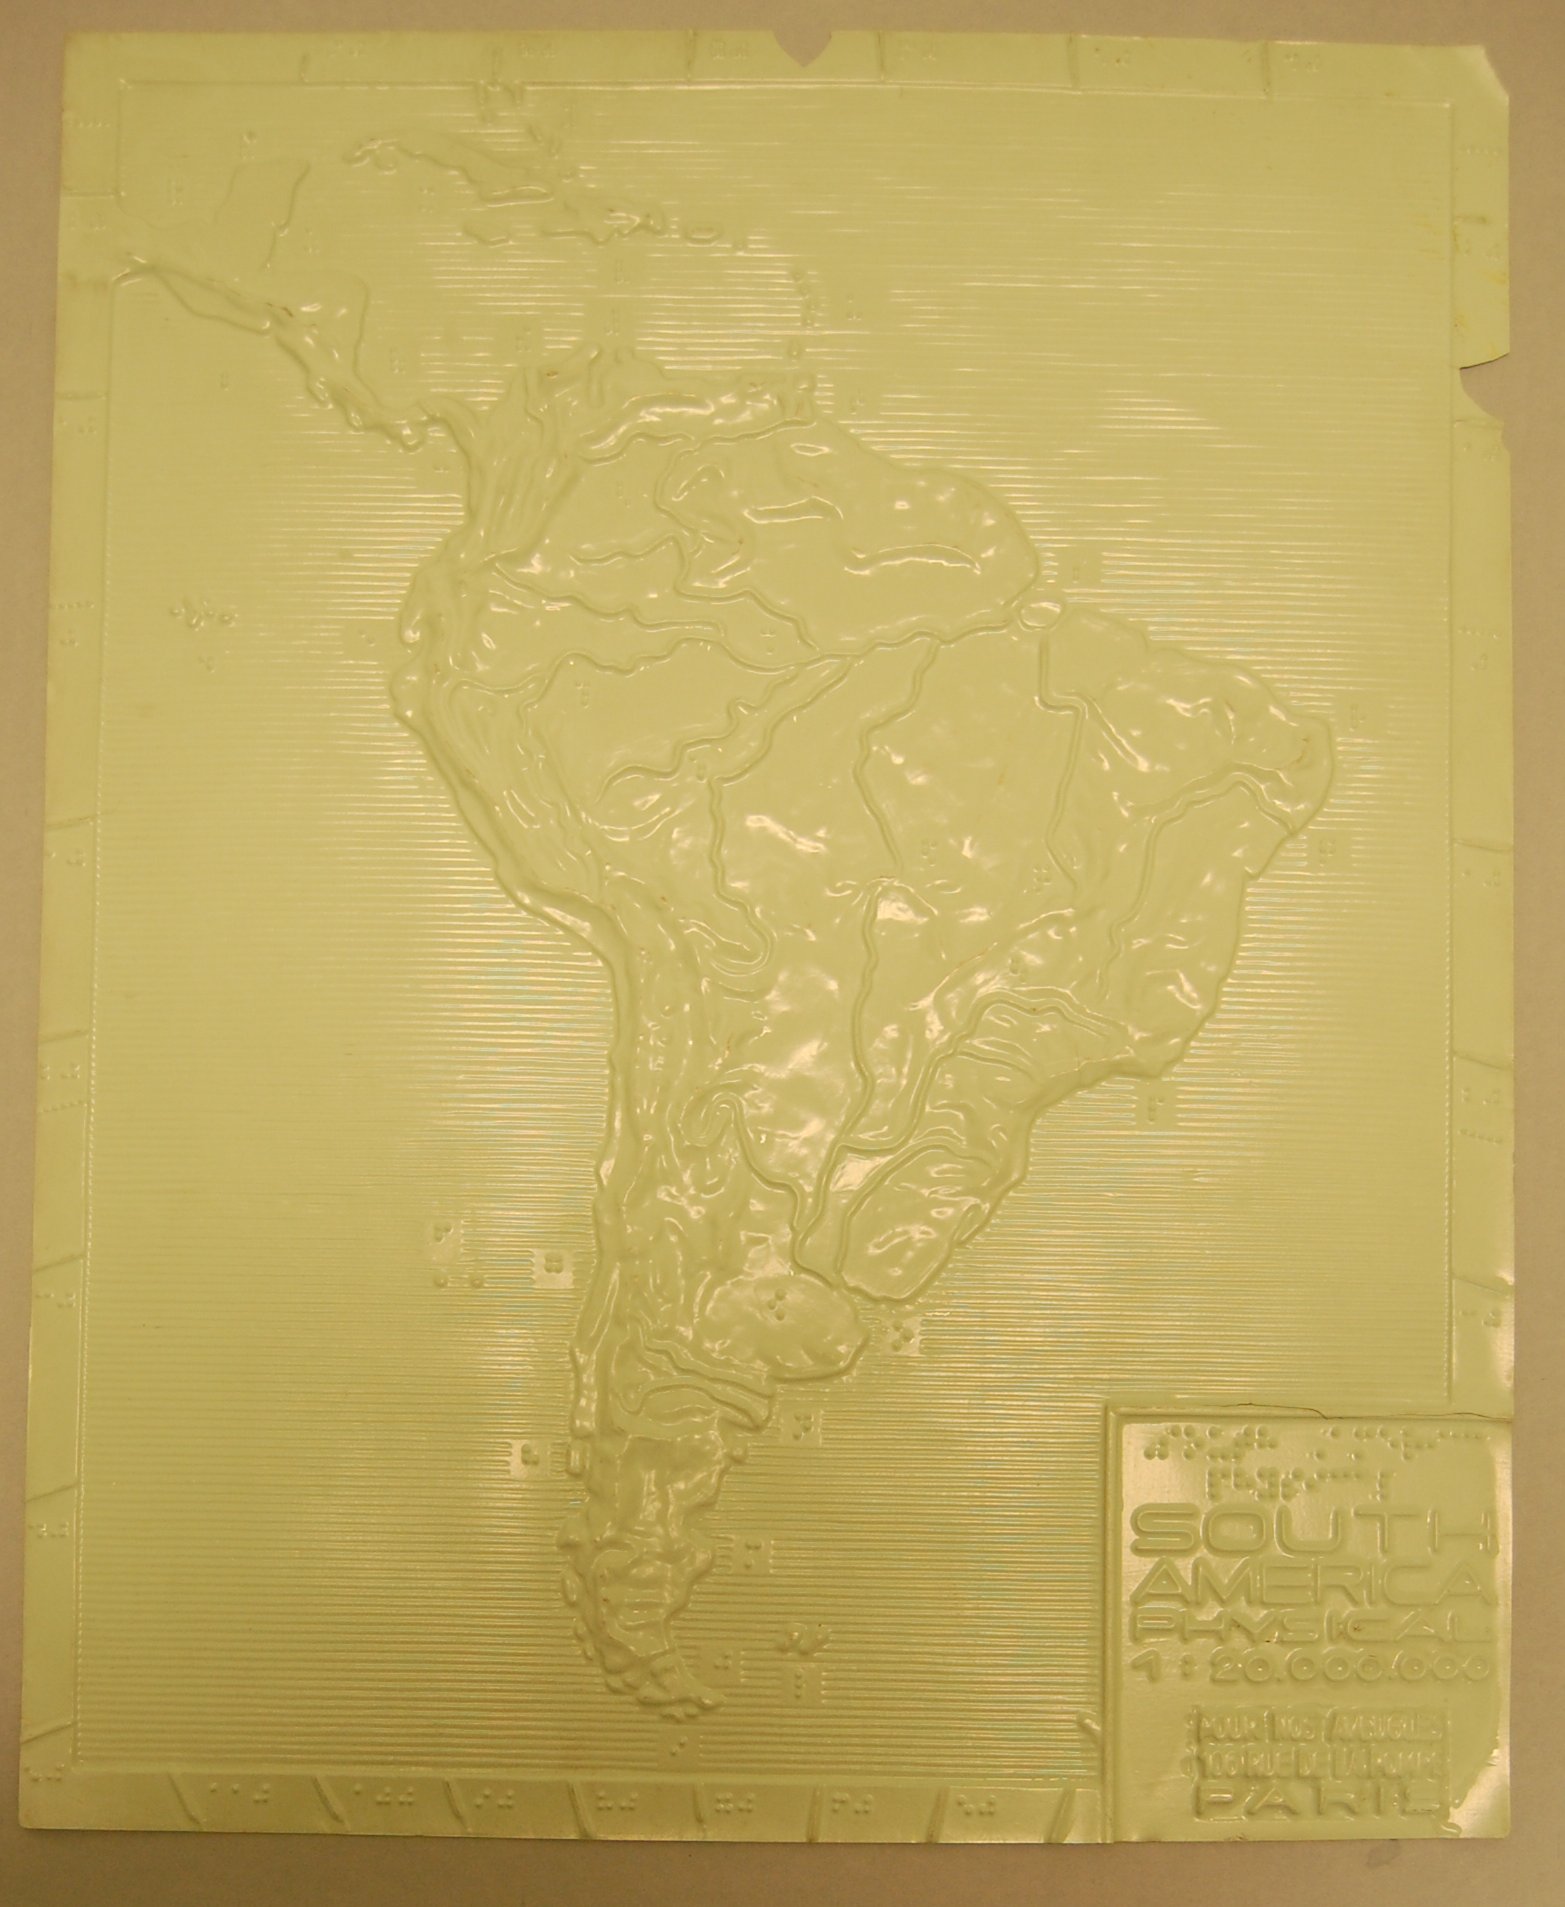 Tactile map of South America-1